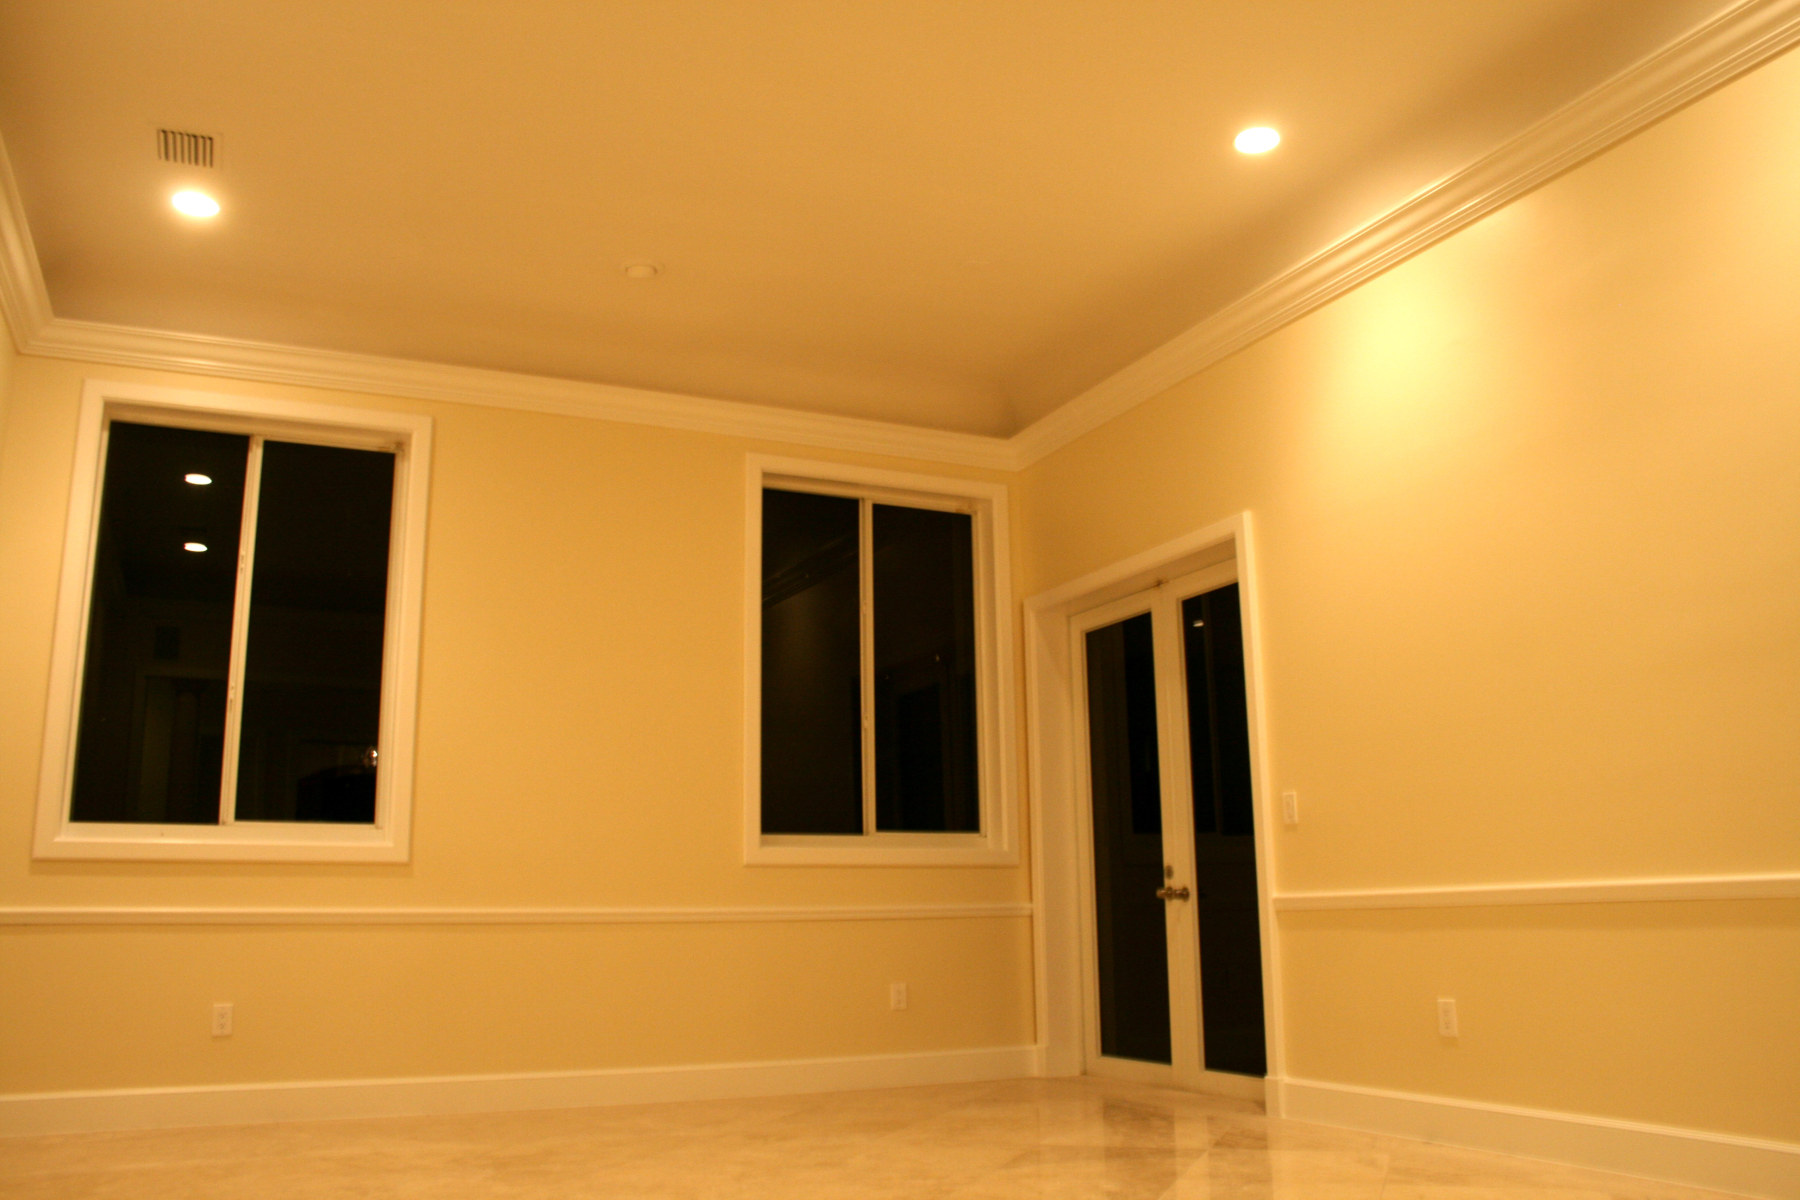 Interior paint at Living Room with high ceilings and crown molding